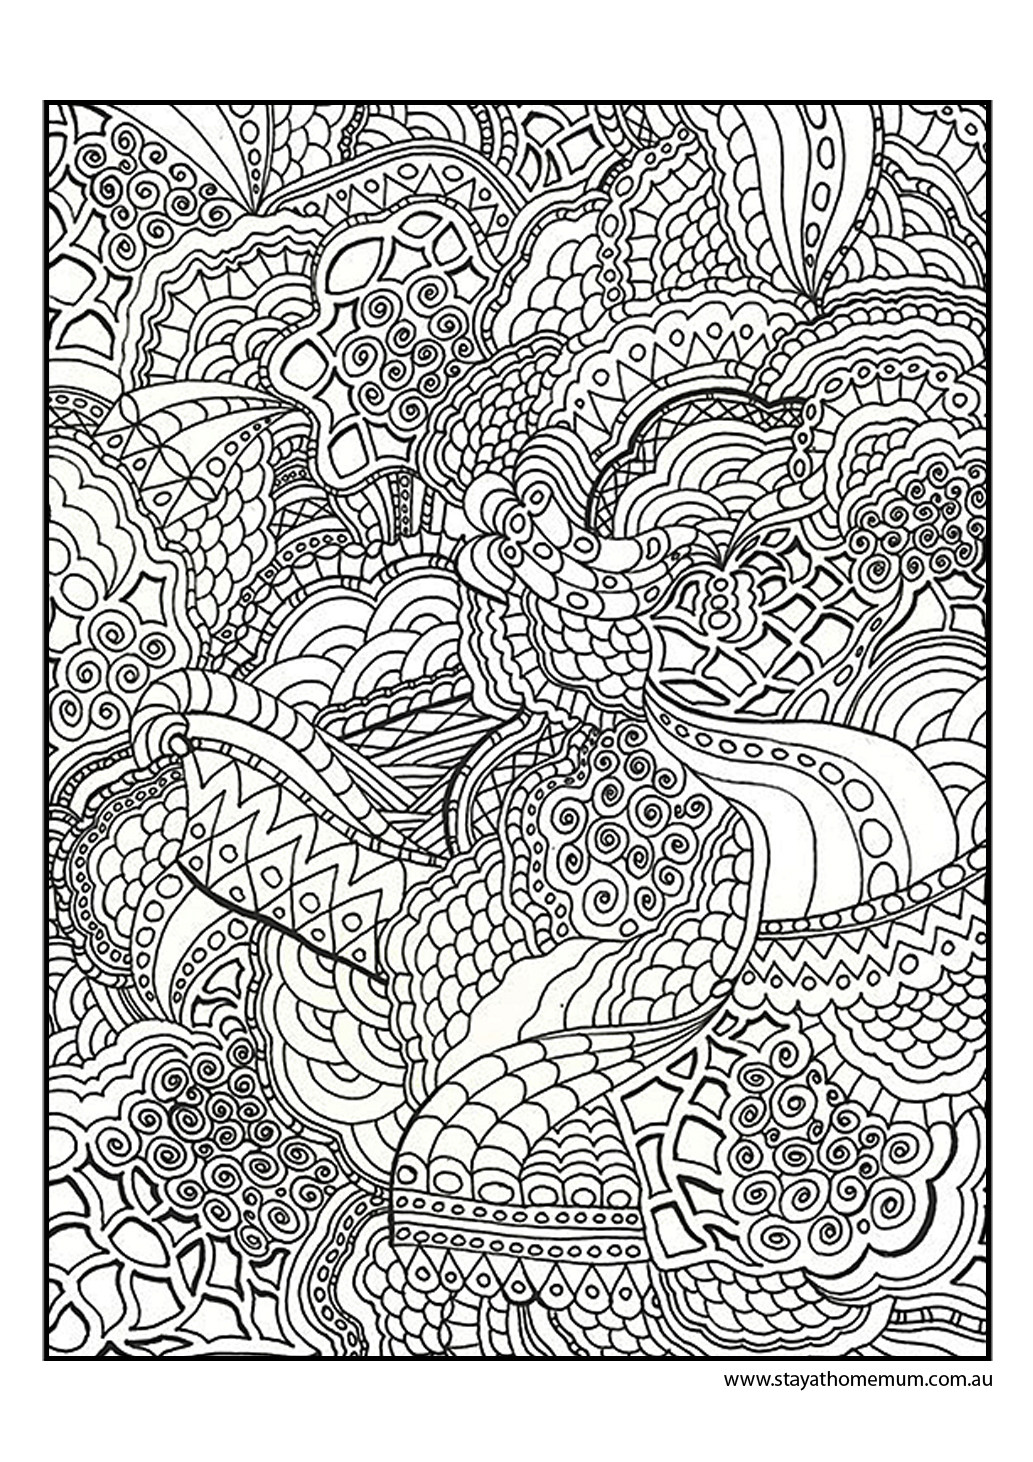 Fun Coloring Pages For Adults
 Printable Colouring Pages for Kids and Adults